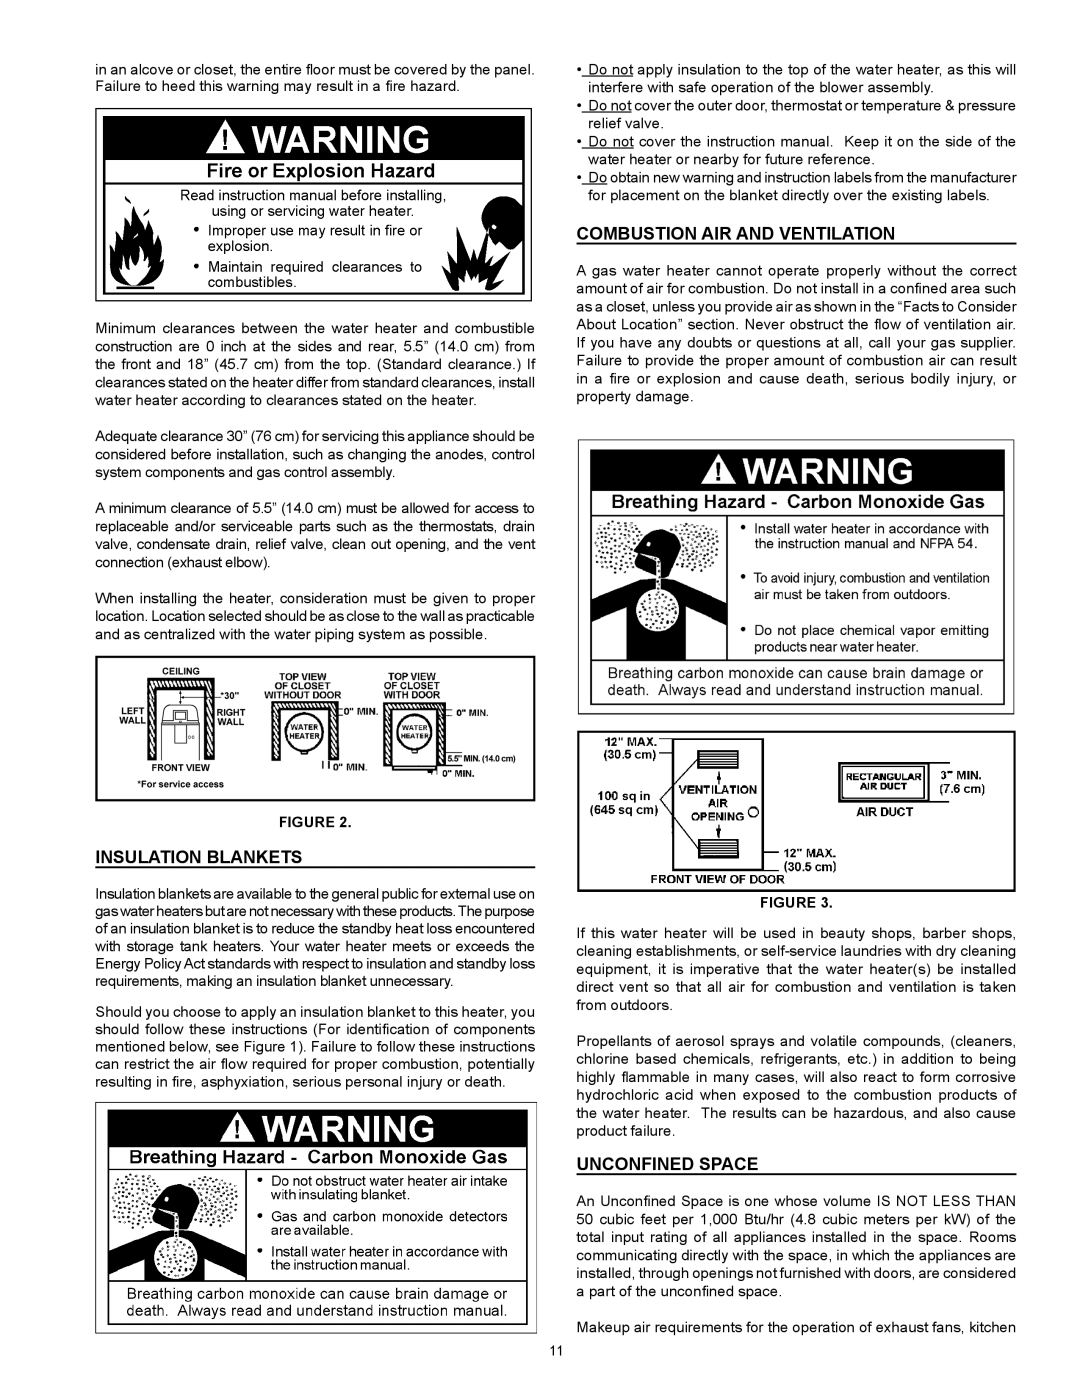 American Water Heater VG6250T100 instruction manual Combustion Air and Ventilation, Insulation Blankets, Unconfined Space 